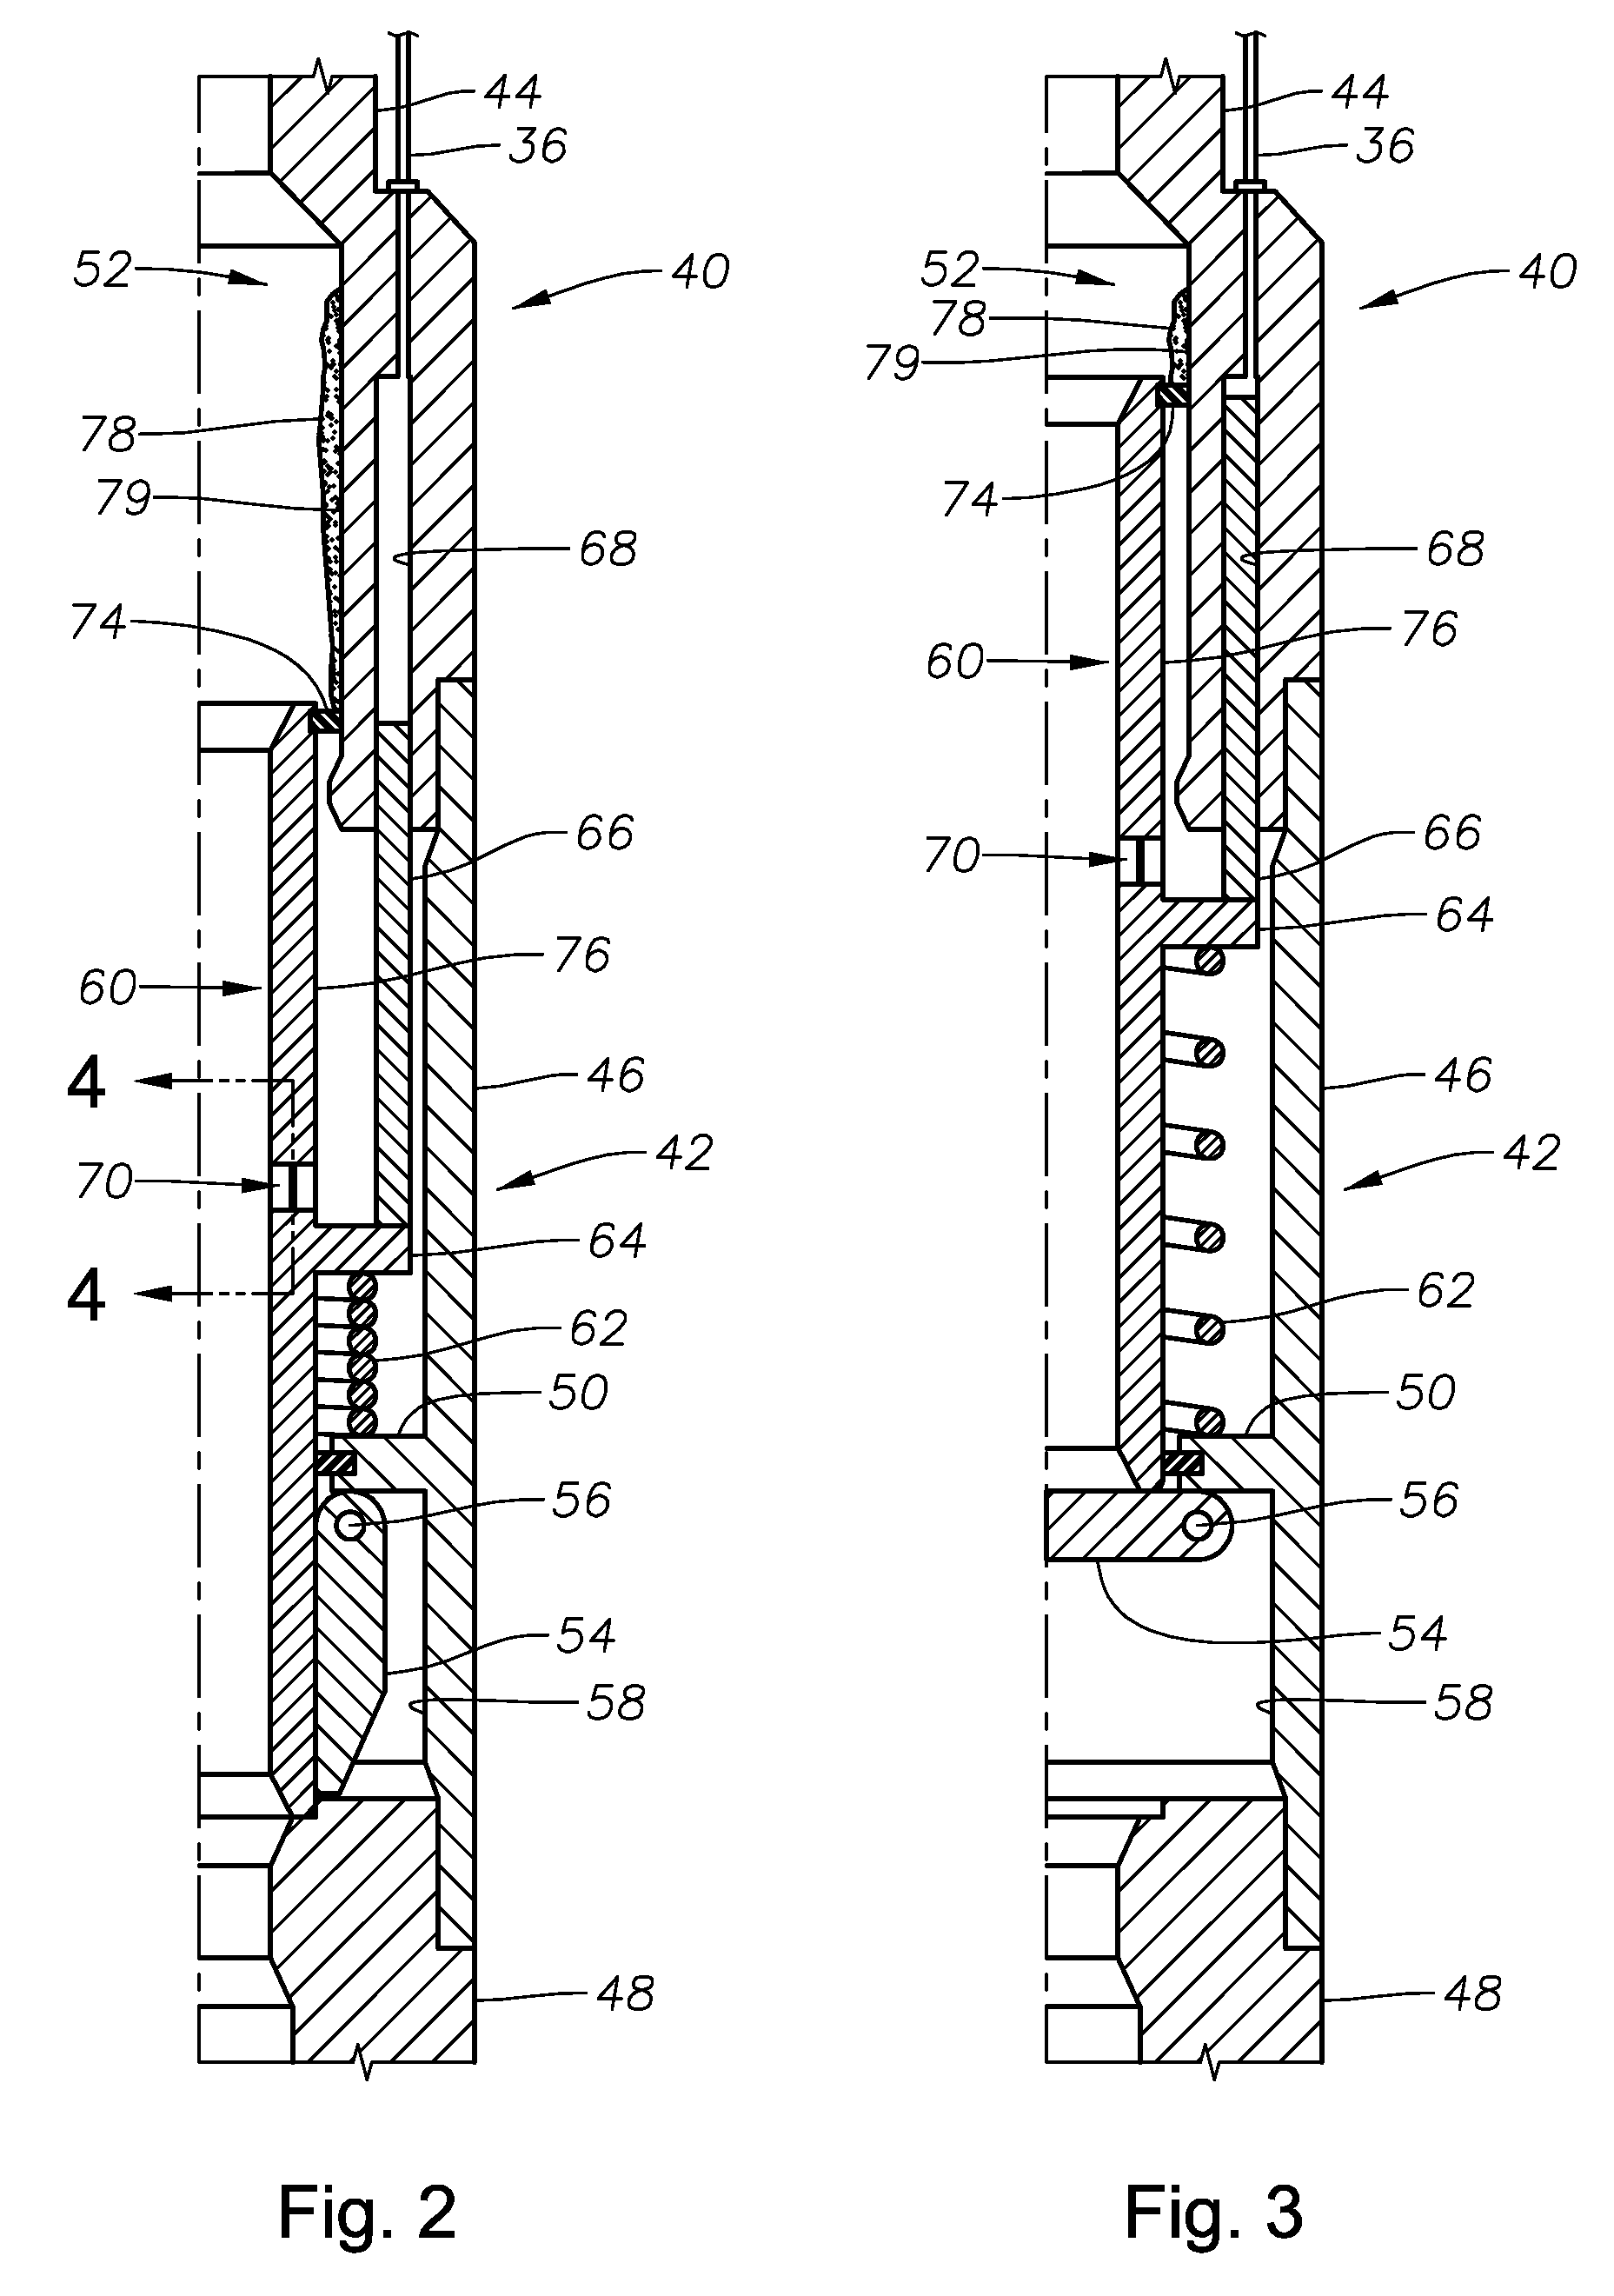 Methods and apparatus for negating mineral scale buildup in flapper valves